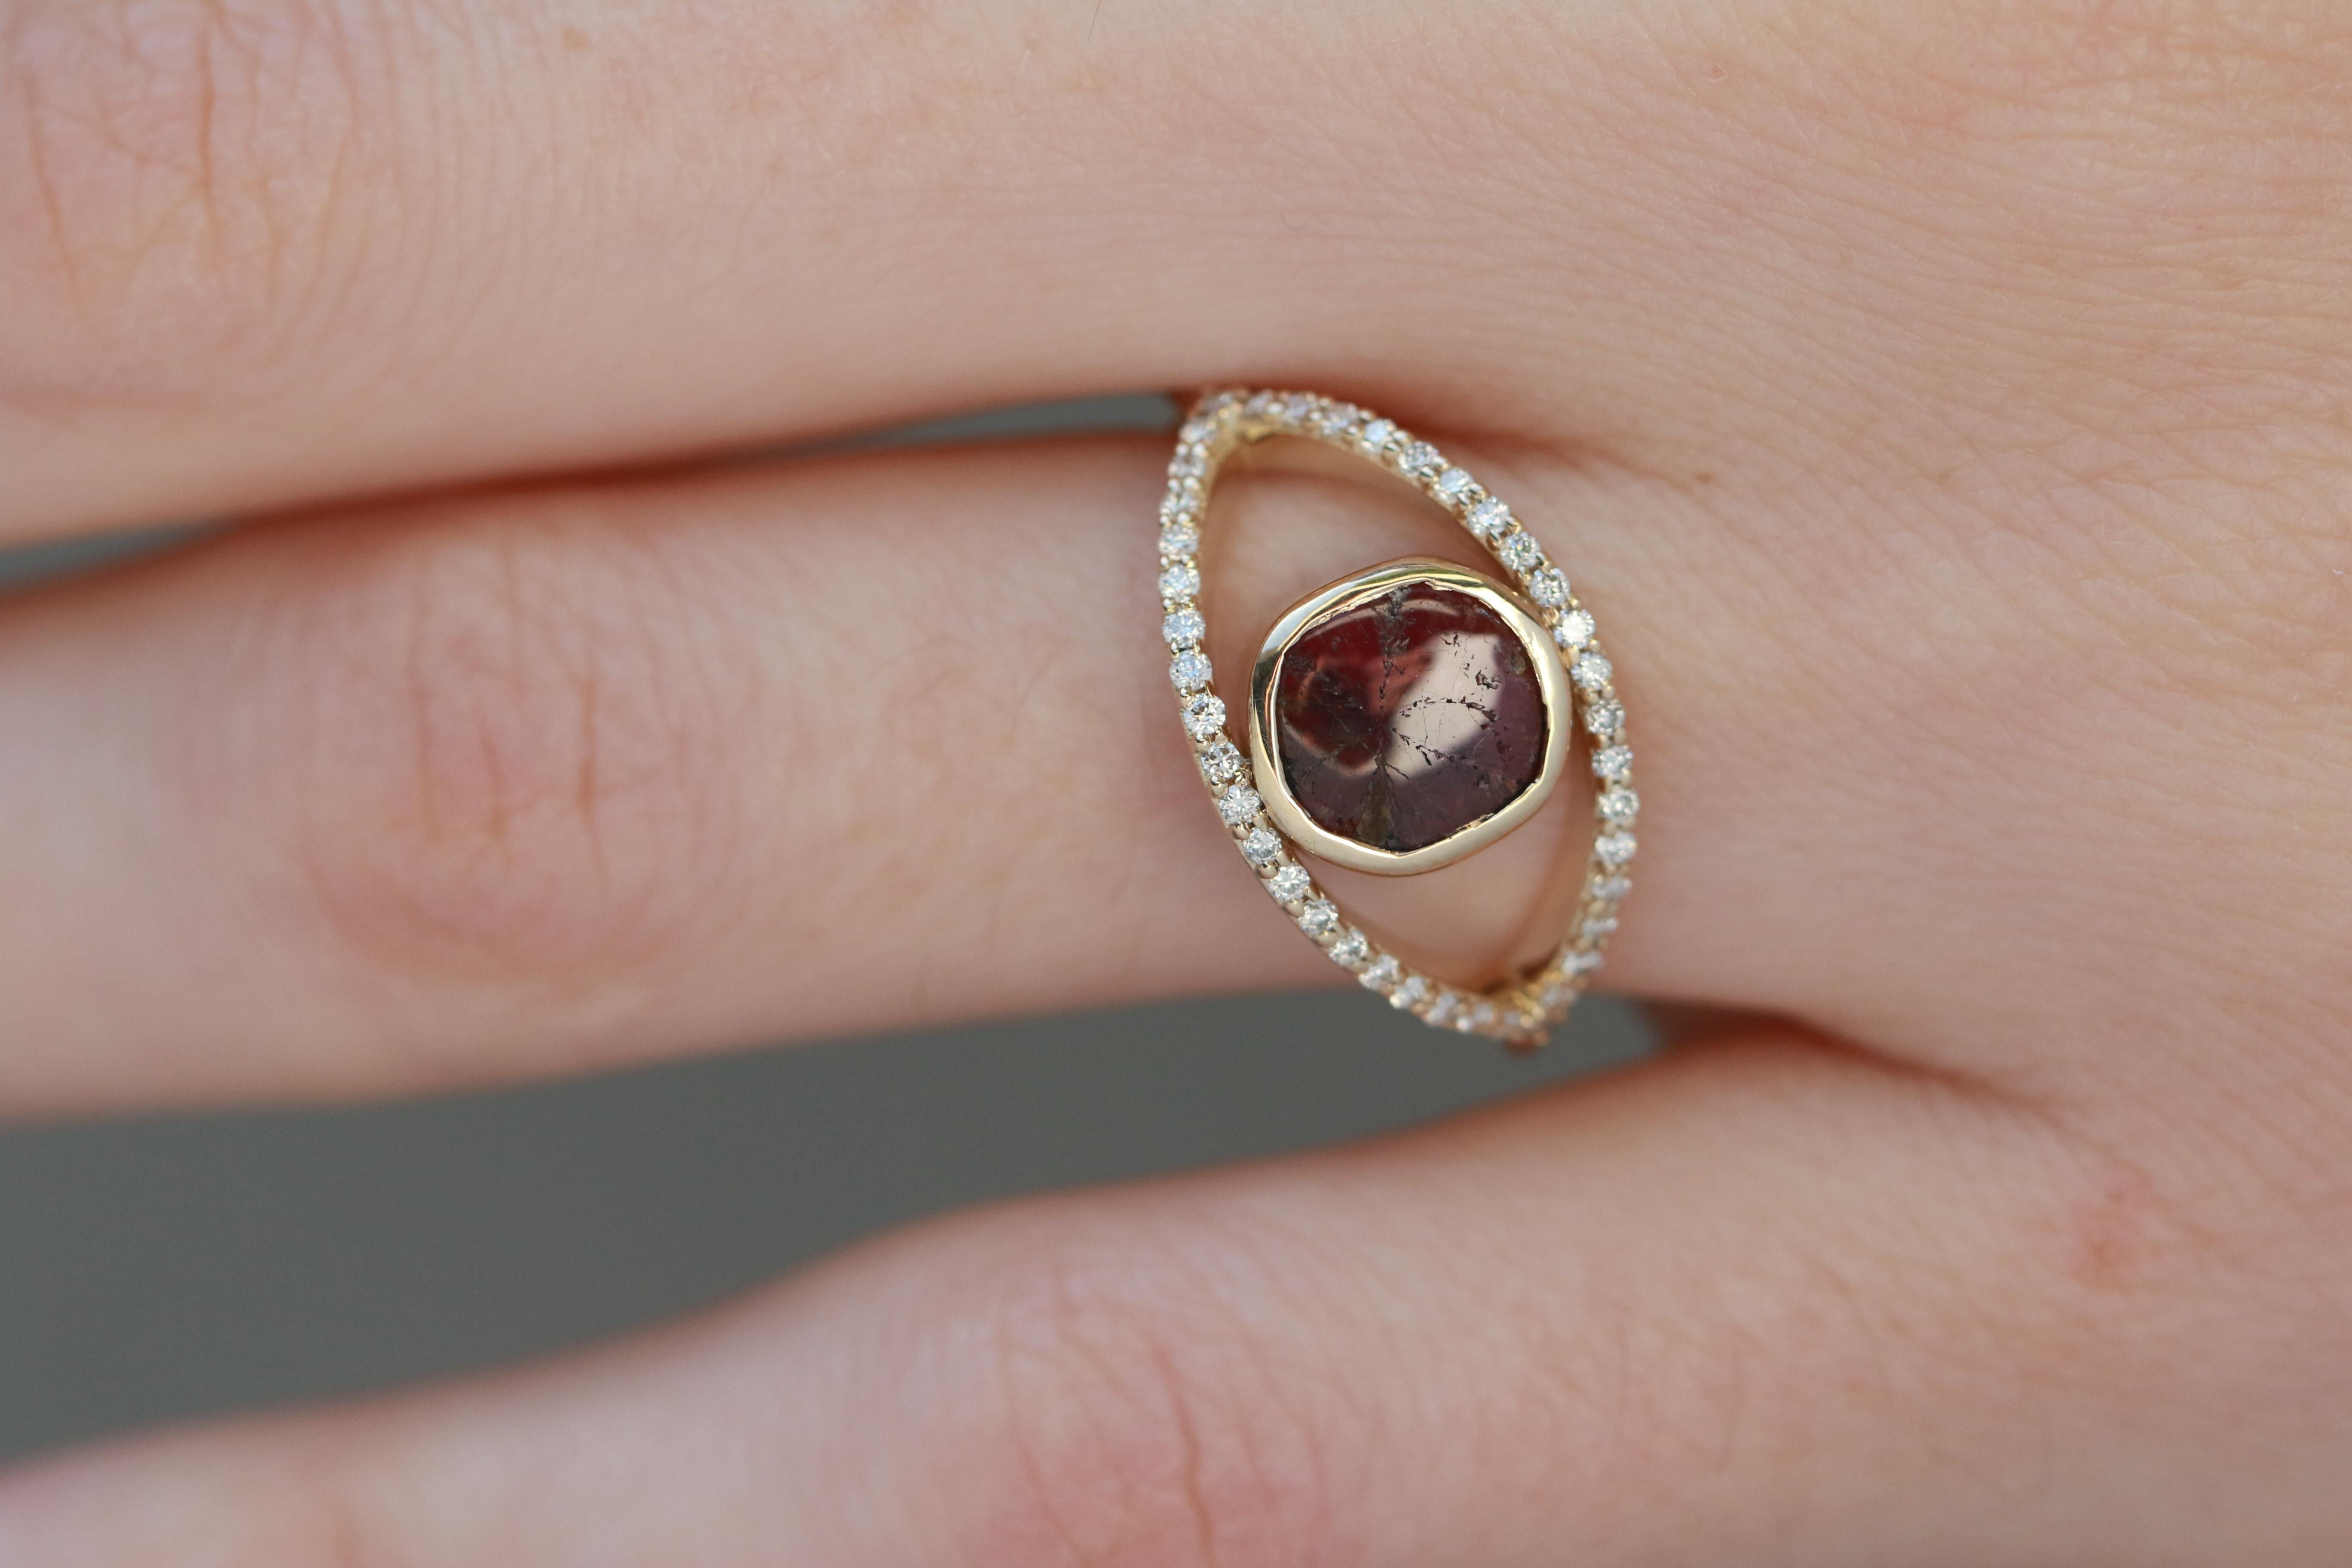 A trapiche ruby with its hallmark starburst pattern is surrounded by an eye marquis shaped ring, accented by 40 brilliant white diamonds. 

Stones:
Trapiche ruby slice, ~6mm
40 1mm full cut round white diamonds